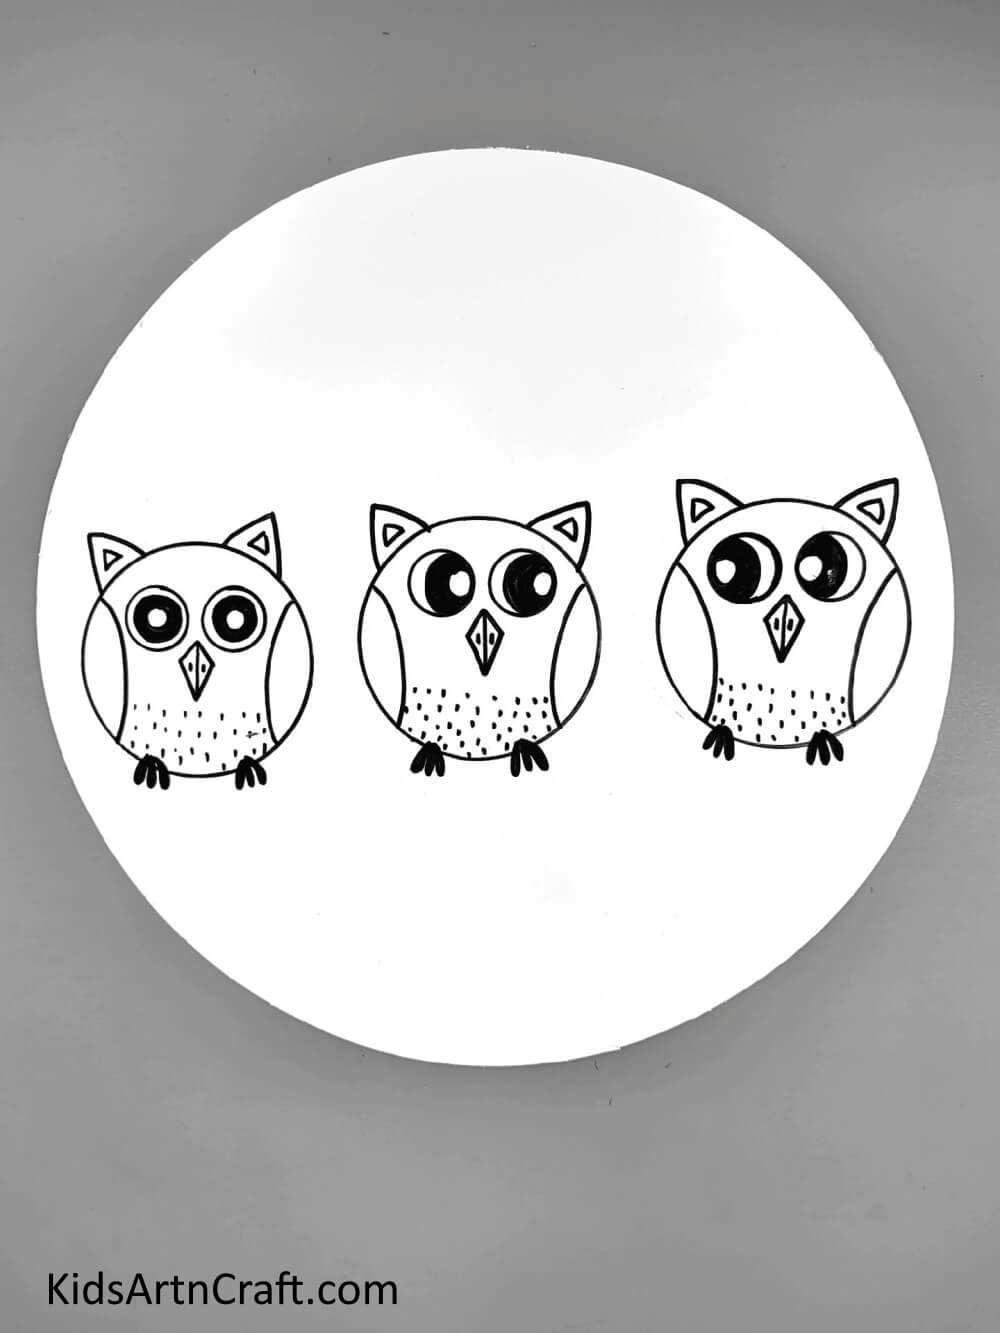 Drawing The Owls - A simple guide on how to draw an assembly of owls for kids. 